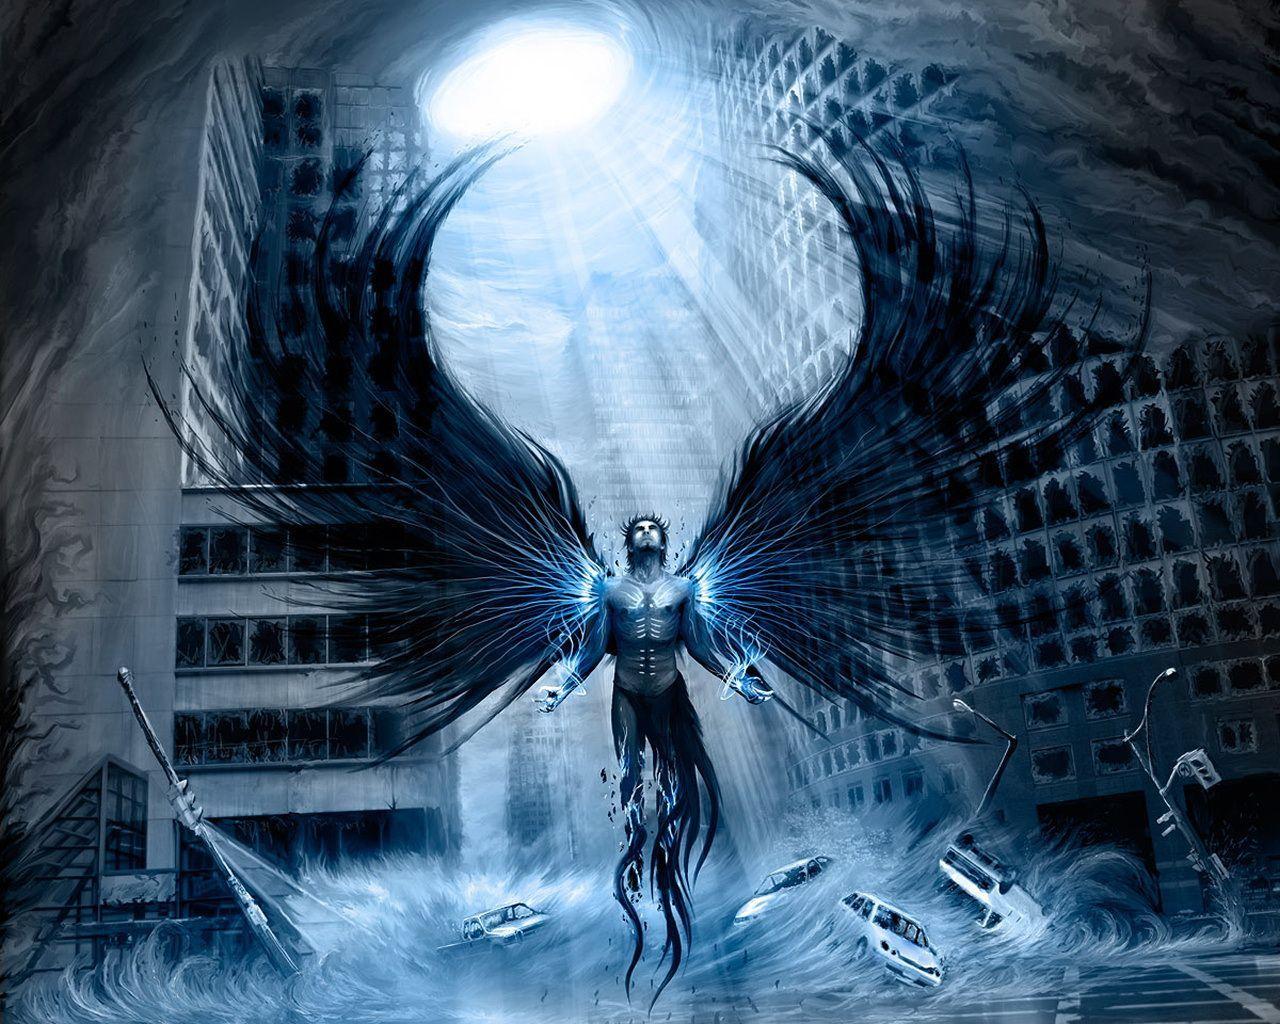 Disaster Water Angel in the City wallpaper from Angels wallpaper